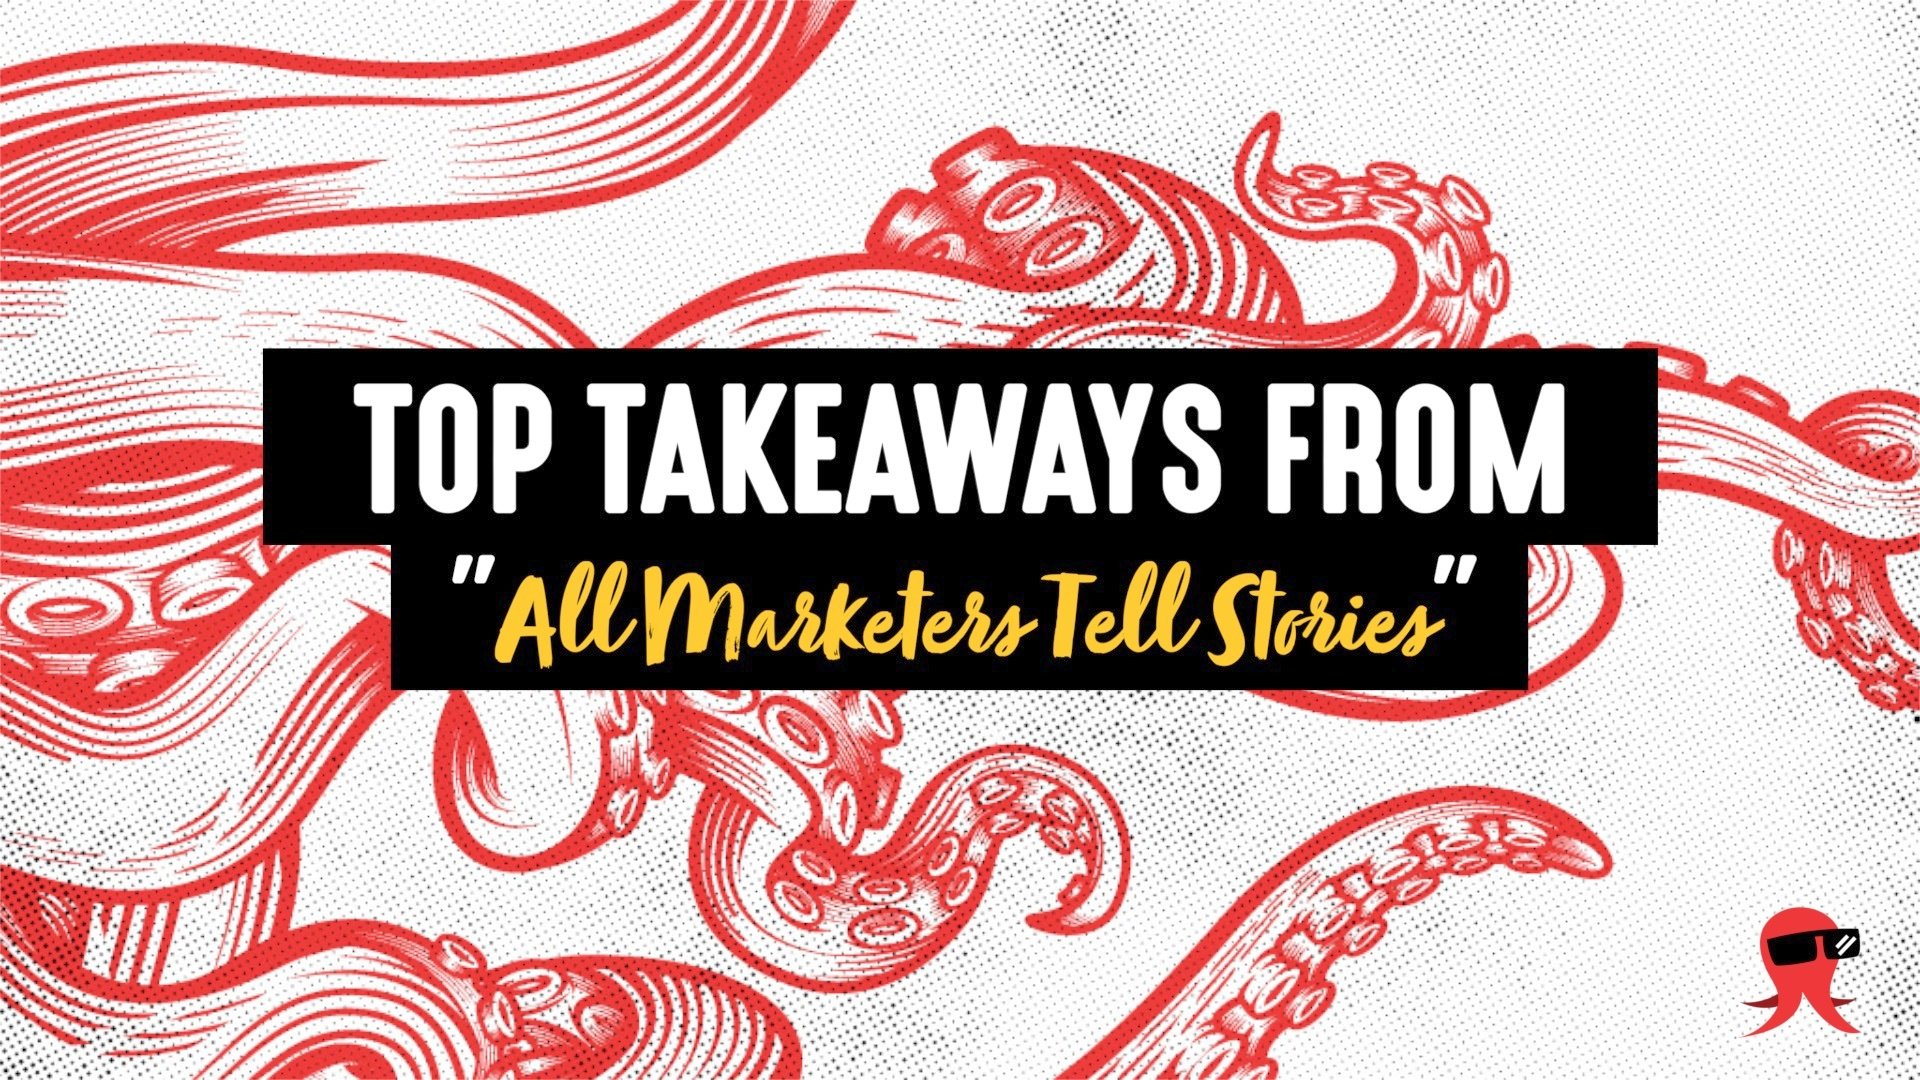 All Marketers Tell Stories | Snappy Book Reviews